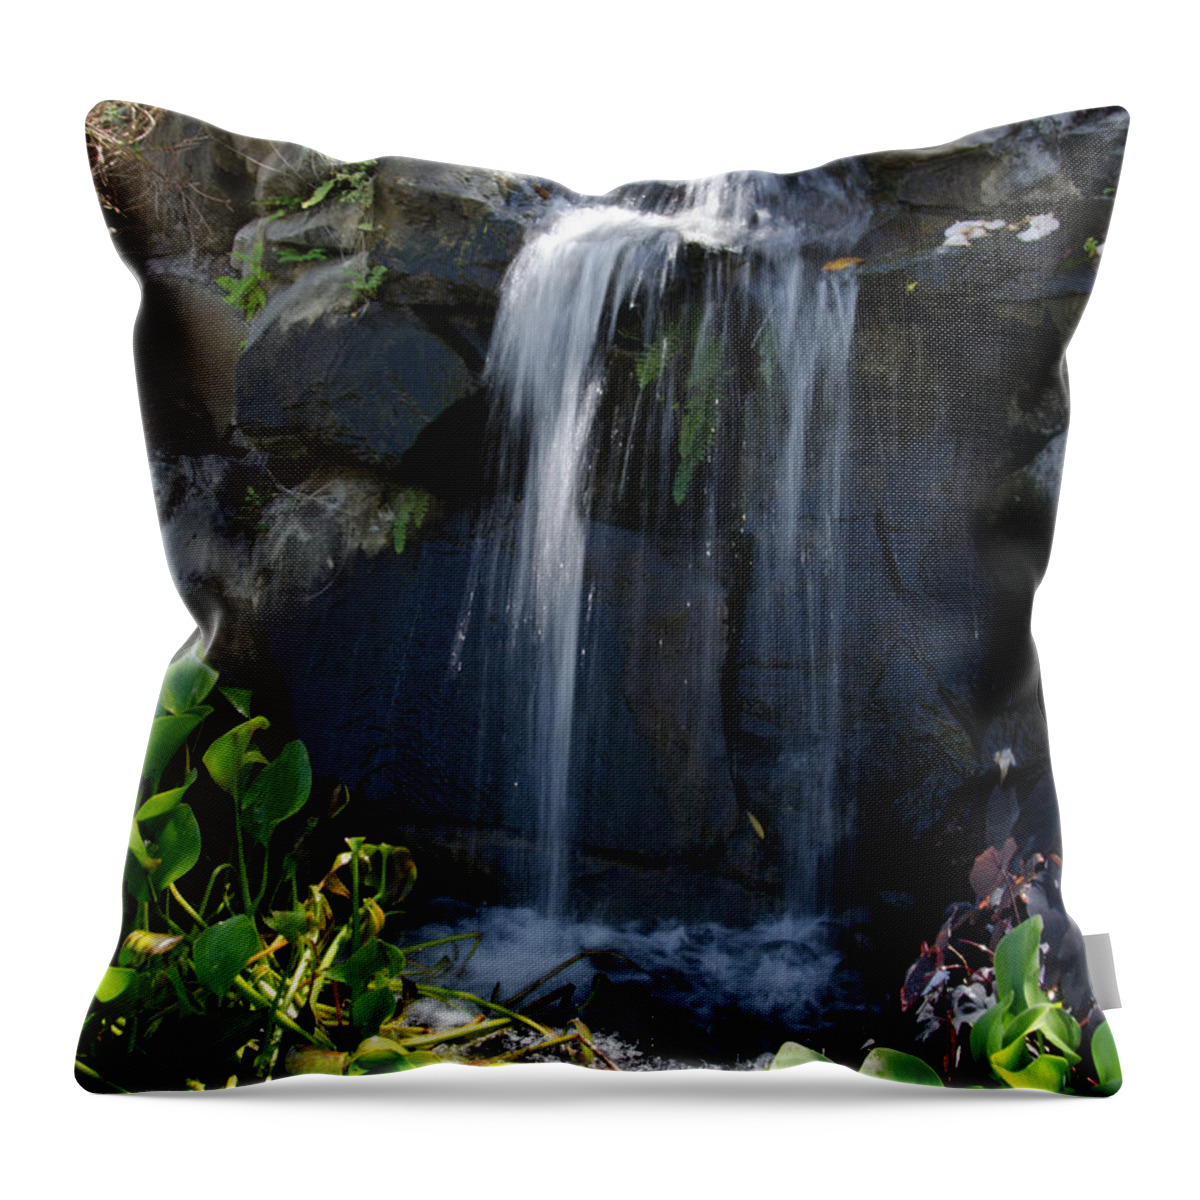 Waterfall Throw Pillow featuring the photograph Tropical Waterfall by Laurel Best